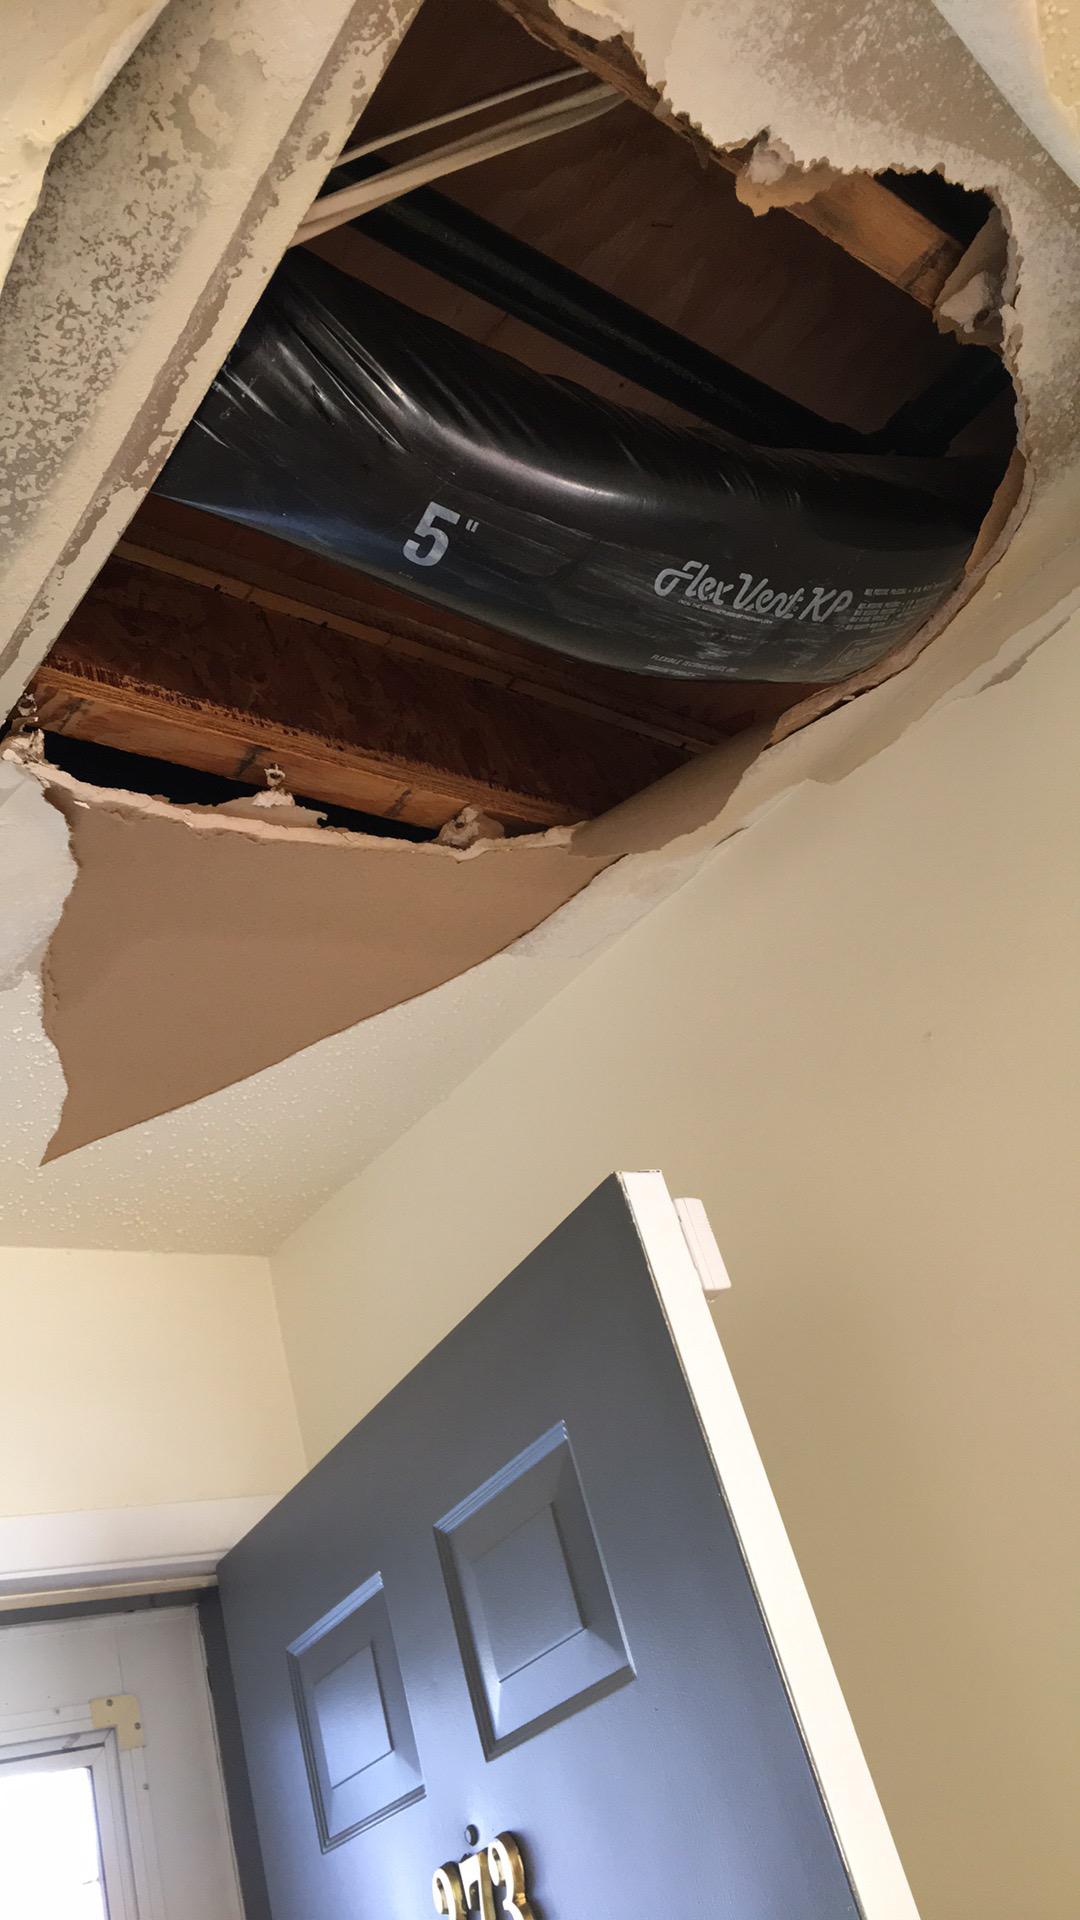 Ceiling damage from water intrusion